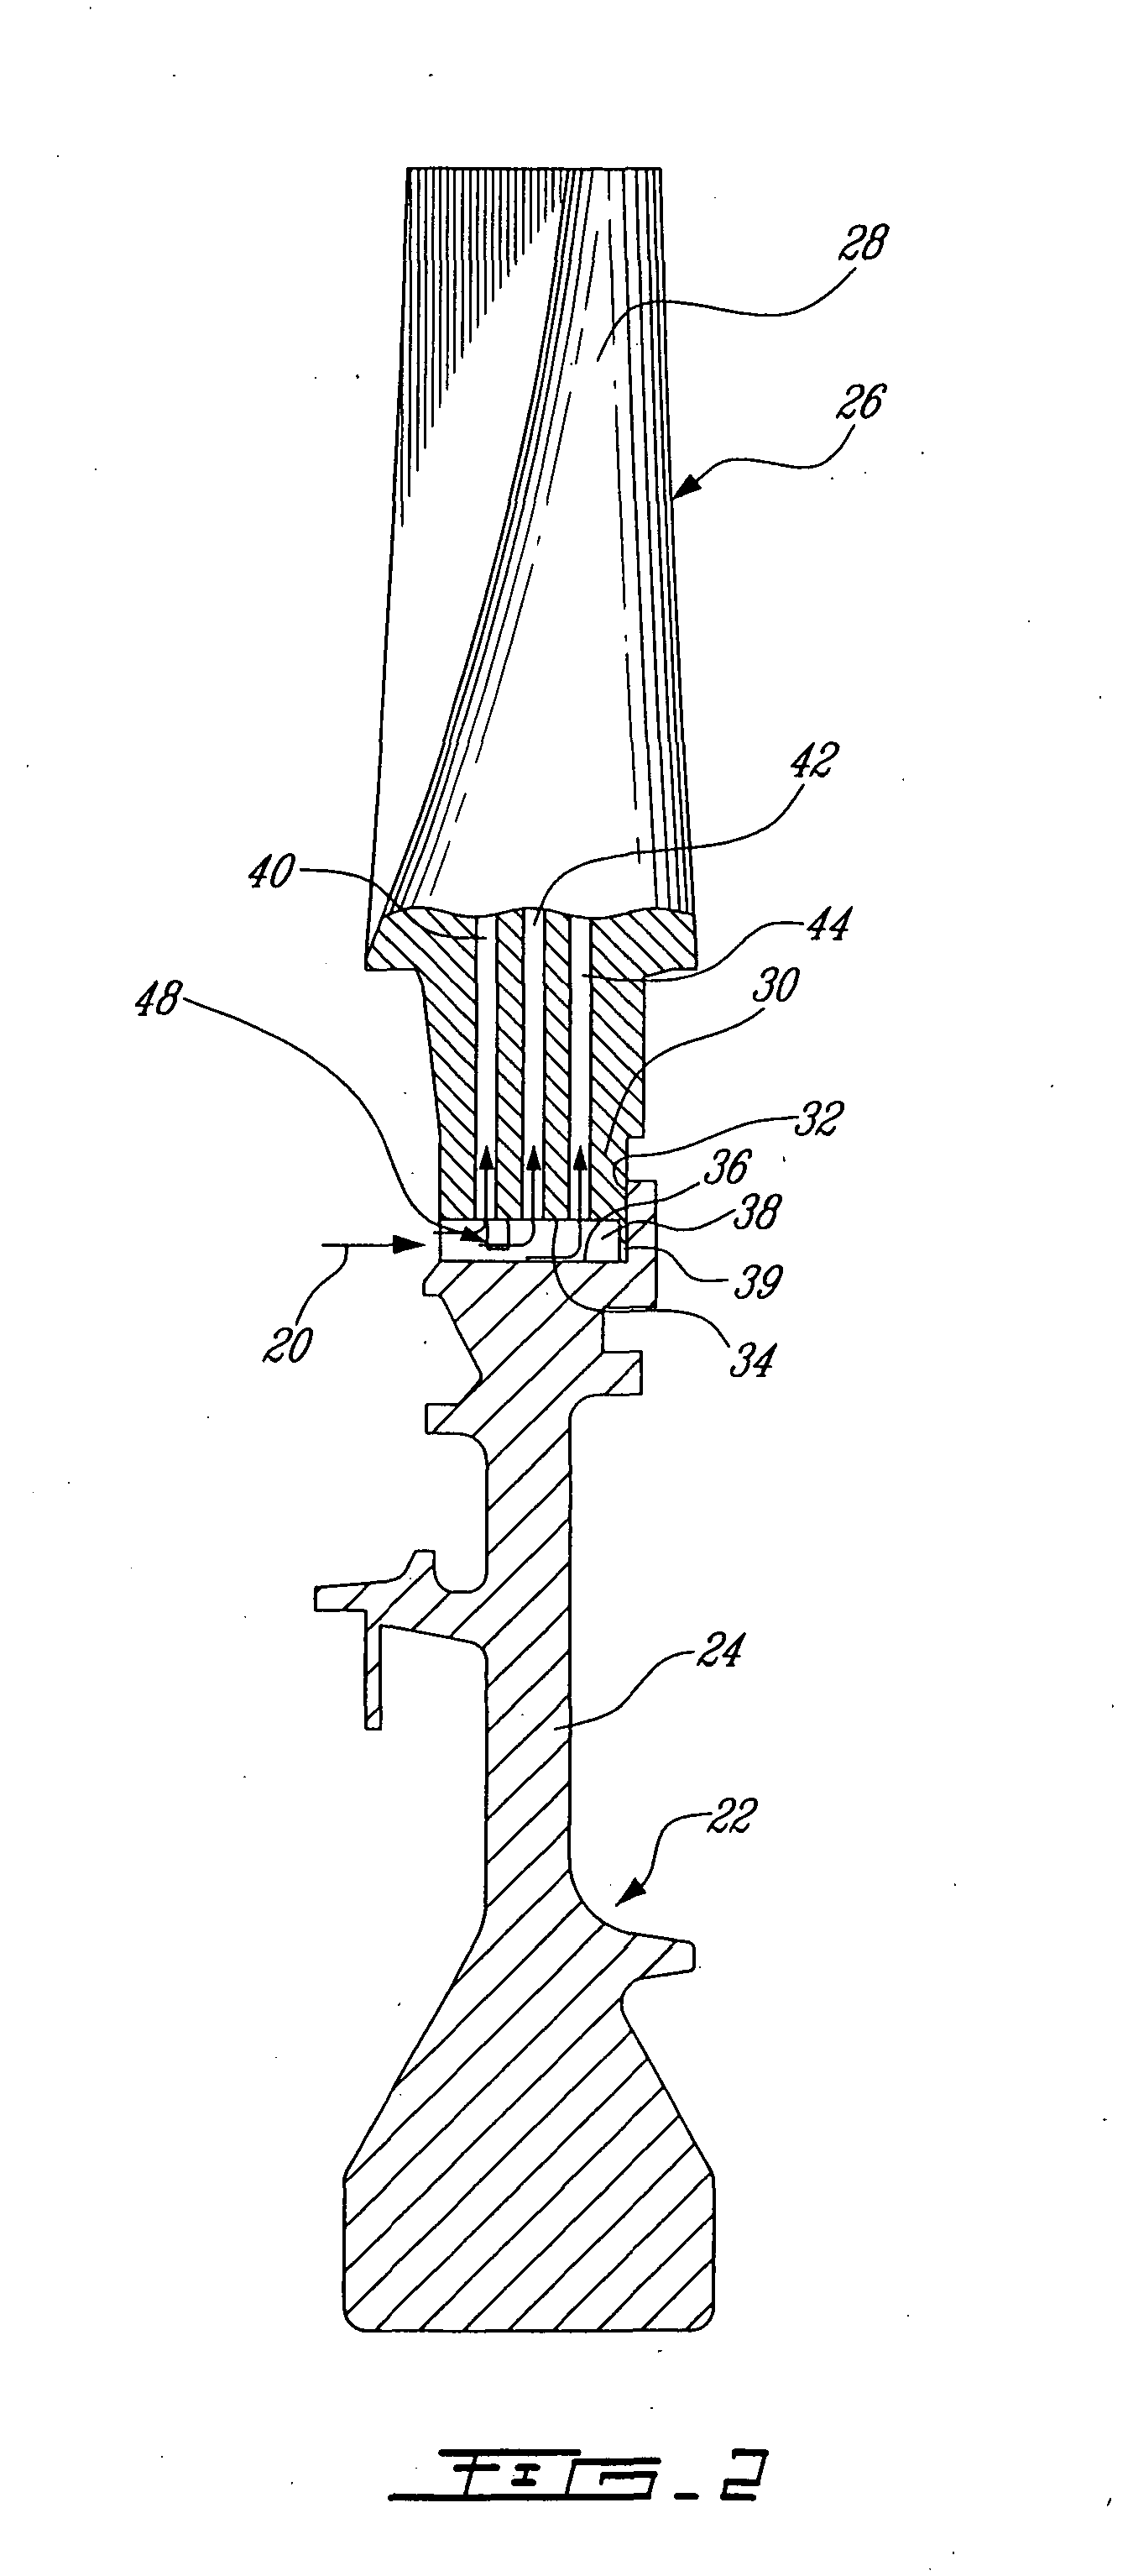 Blade inlet cooling flow deflector apparatus and method